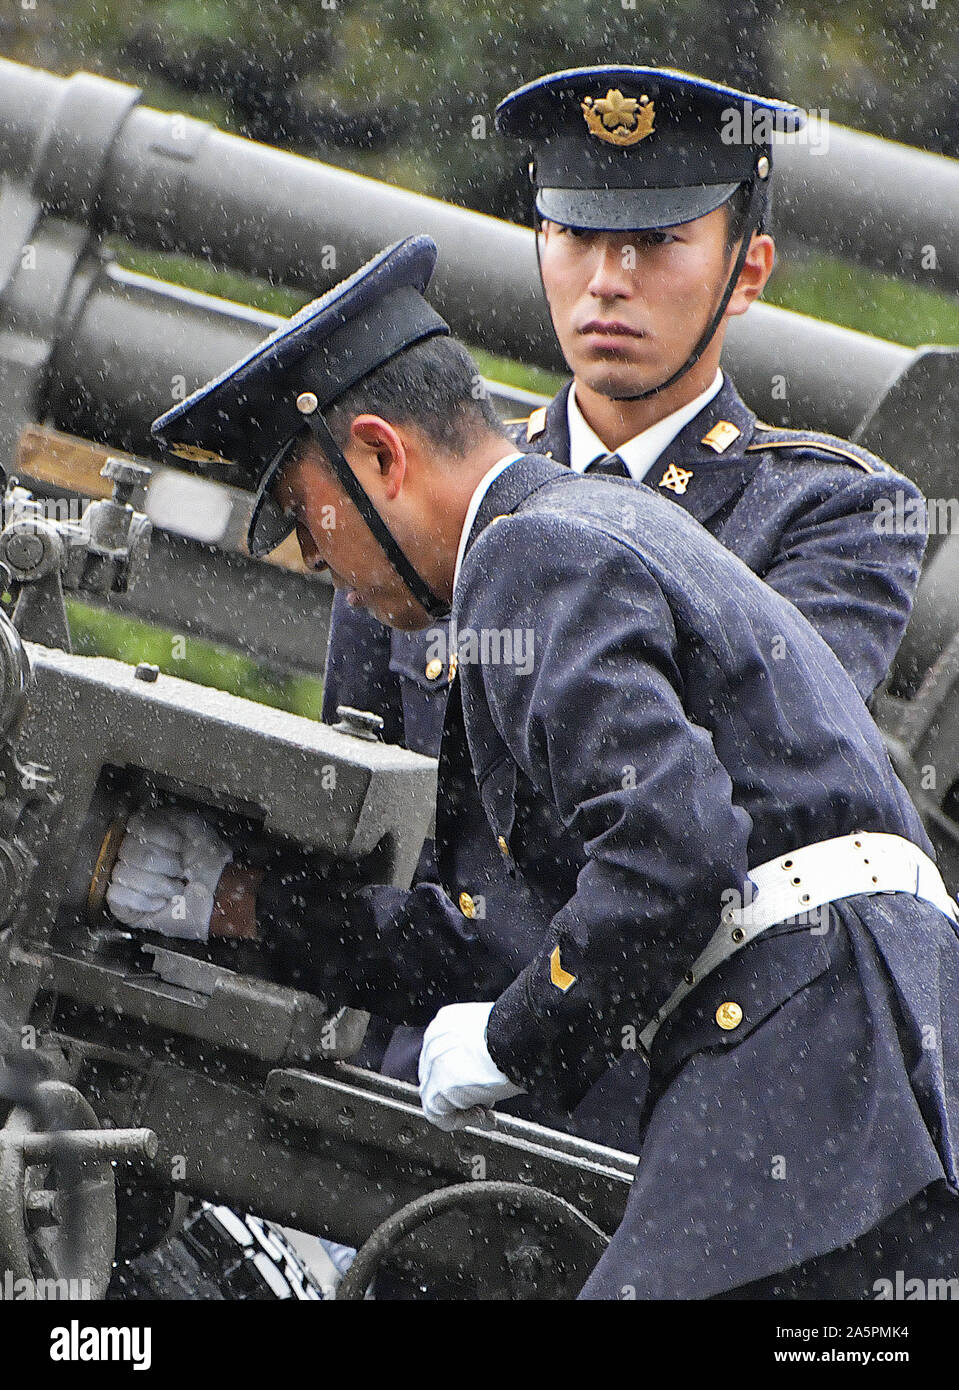 Tokyo, Japan. 22nd Oct, 2019. Members of Japan Ground Self-Defense Forces prepare to fire a 21 gun salute during a proclamation ceremony marking Emperor Naruhito's ascension to the throne at the Kitanomaru Park in Tokyo, Japan on Tuesday, October 22, 2019. New Emperor Naruhito proclaimed his enthronement before roughly 2,000 guests from home and more than 180 countries in a major ancient-style ceremony at the Imperial Palace in Tokyo that will be steeped in solemnity and tradition. Credit: UPI/Alamy Live News Stock Photo